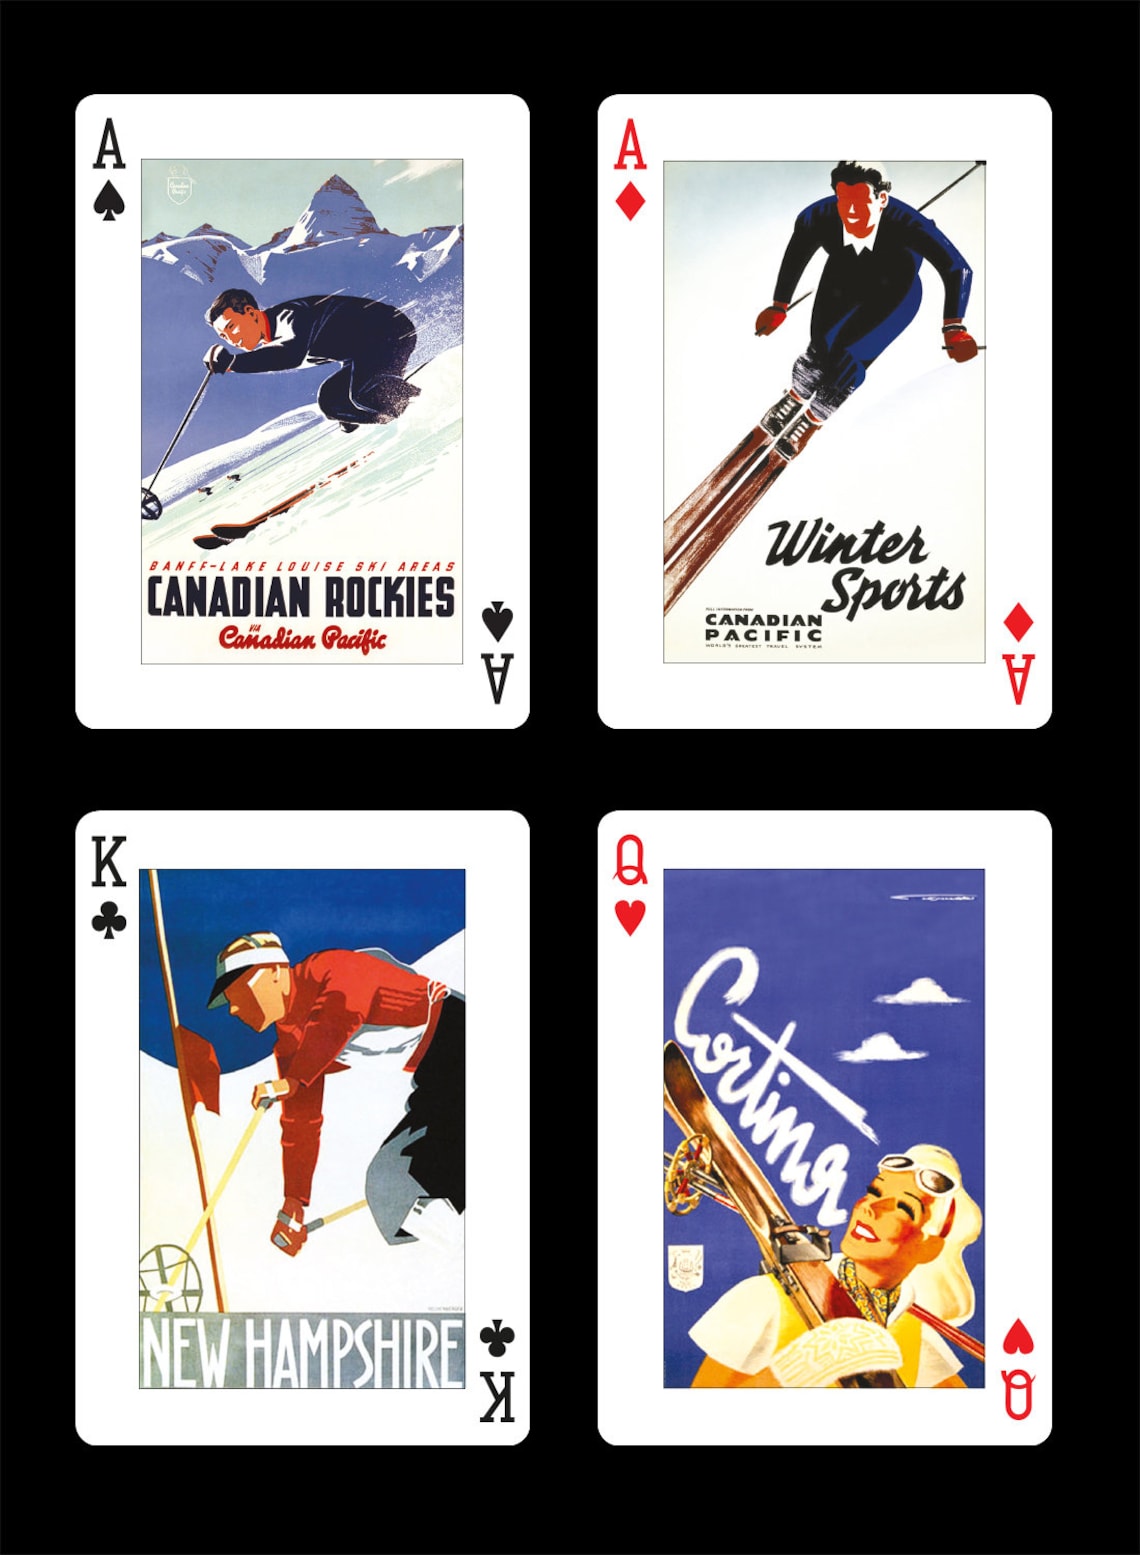 Image of 4 paying cards with art from famous vintage transport and sporting posters. Canadian Rockies Canadian Pacific, Winter Sports Canadian Pacific, New Hampshire & Cortina